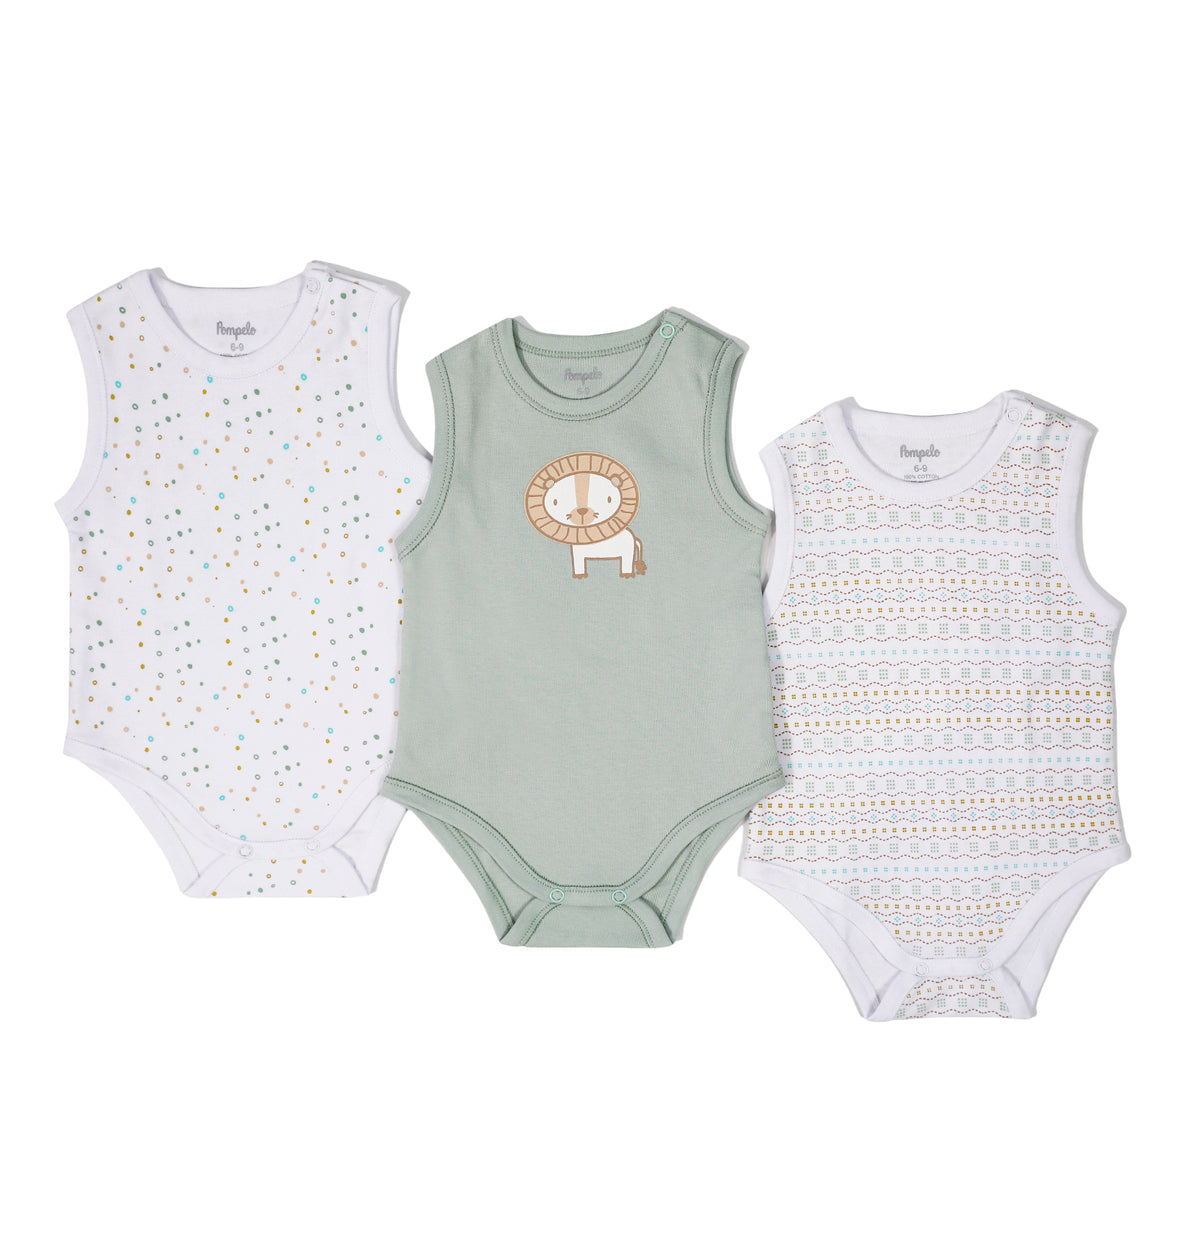 Unique set of 3 sleeveless jumpsuits for baby boys by Pompelo